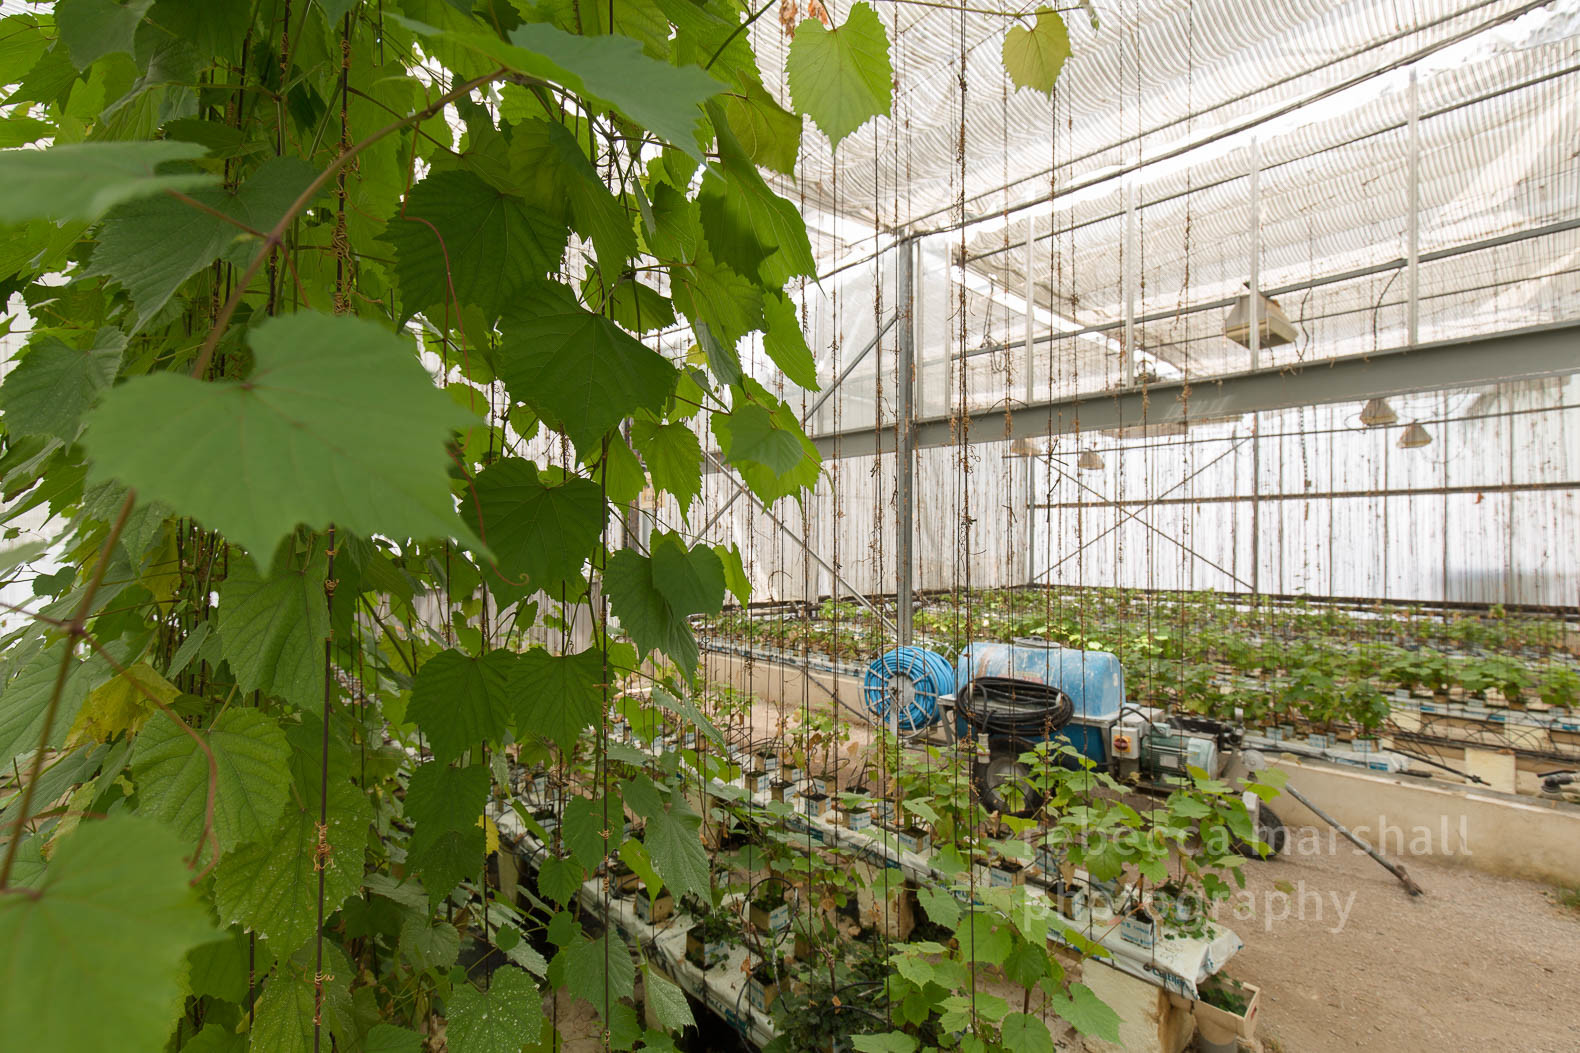 Photograph of a greenhouse growing grape vines